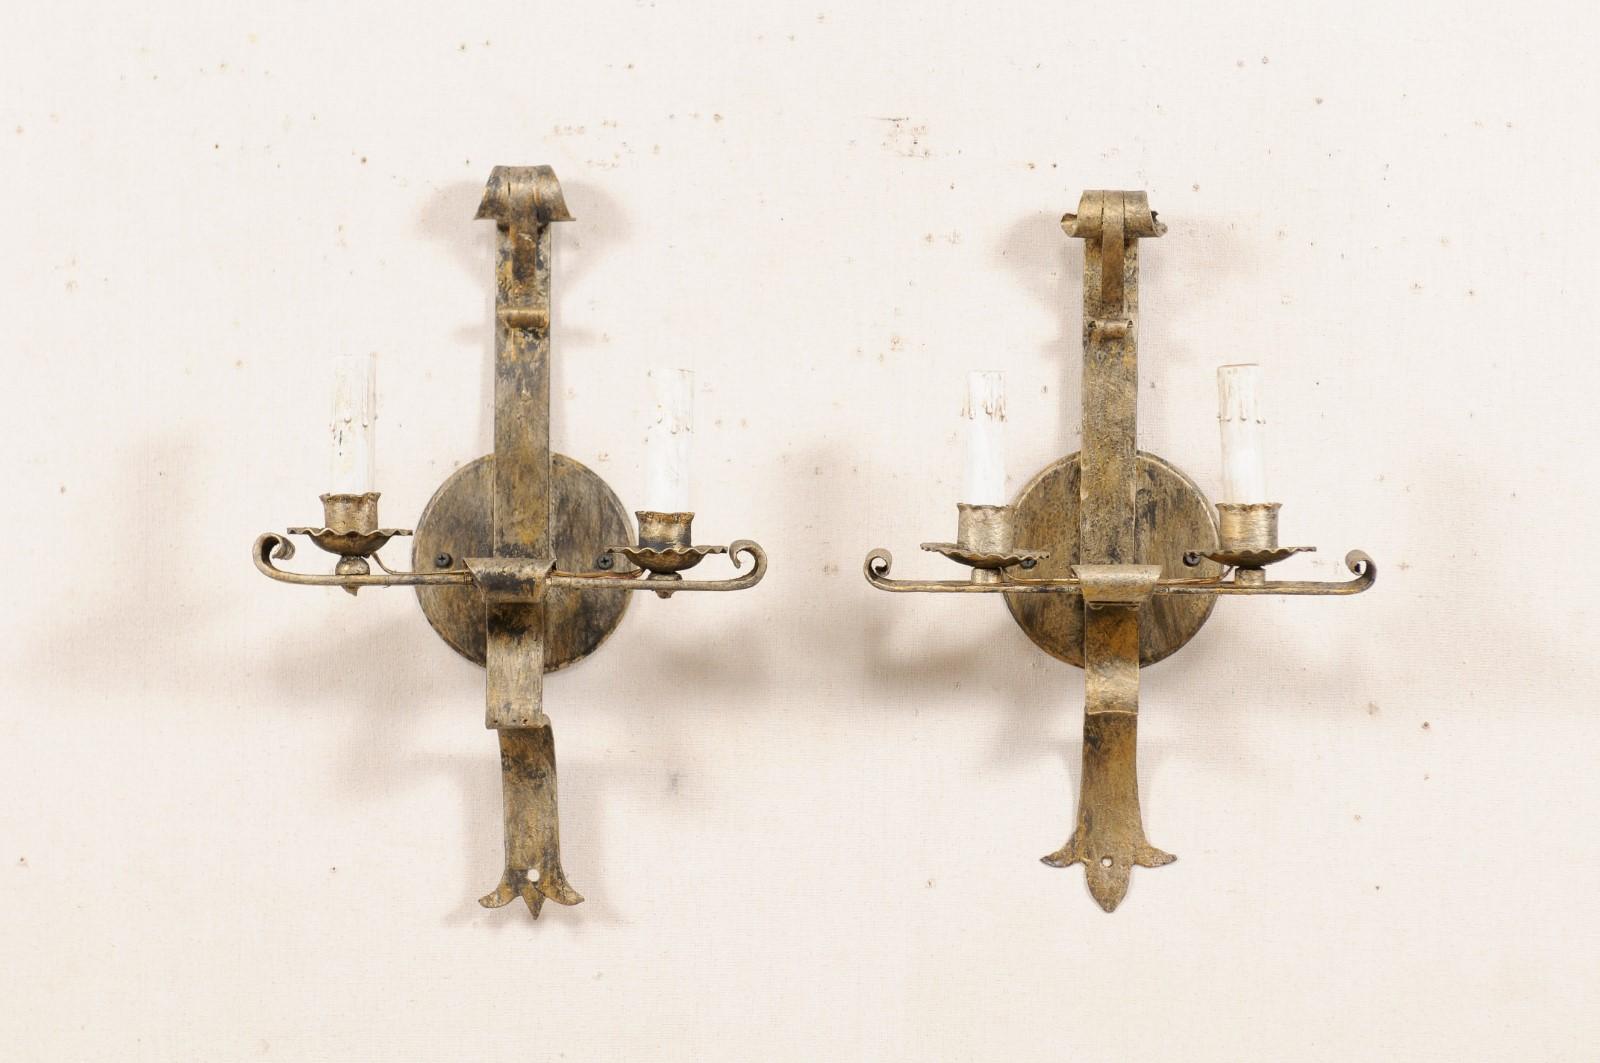 A pair of French two-light gold-tone iron sconces from the mid-20th century. These vintage hand-forged sconces from France each feature a horizontally placed bar, with up-turned tips at each end, providing support to the two ruffled iron bobèches